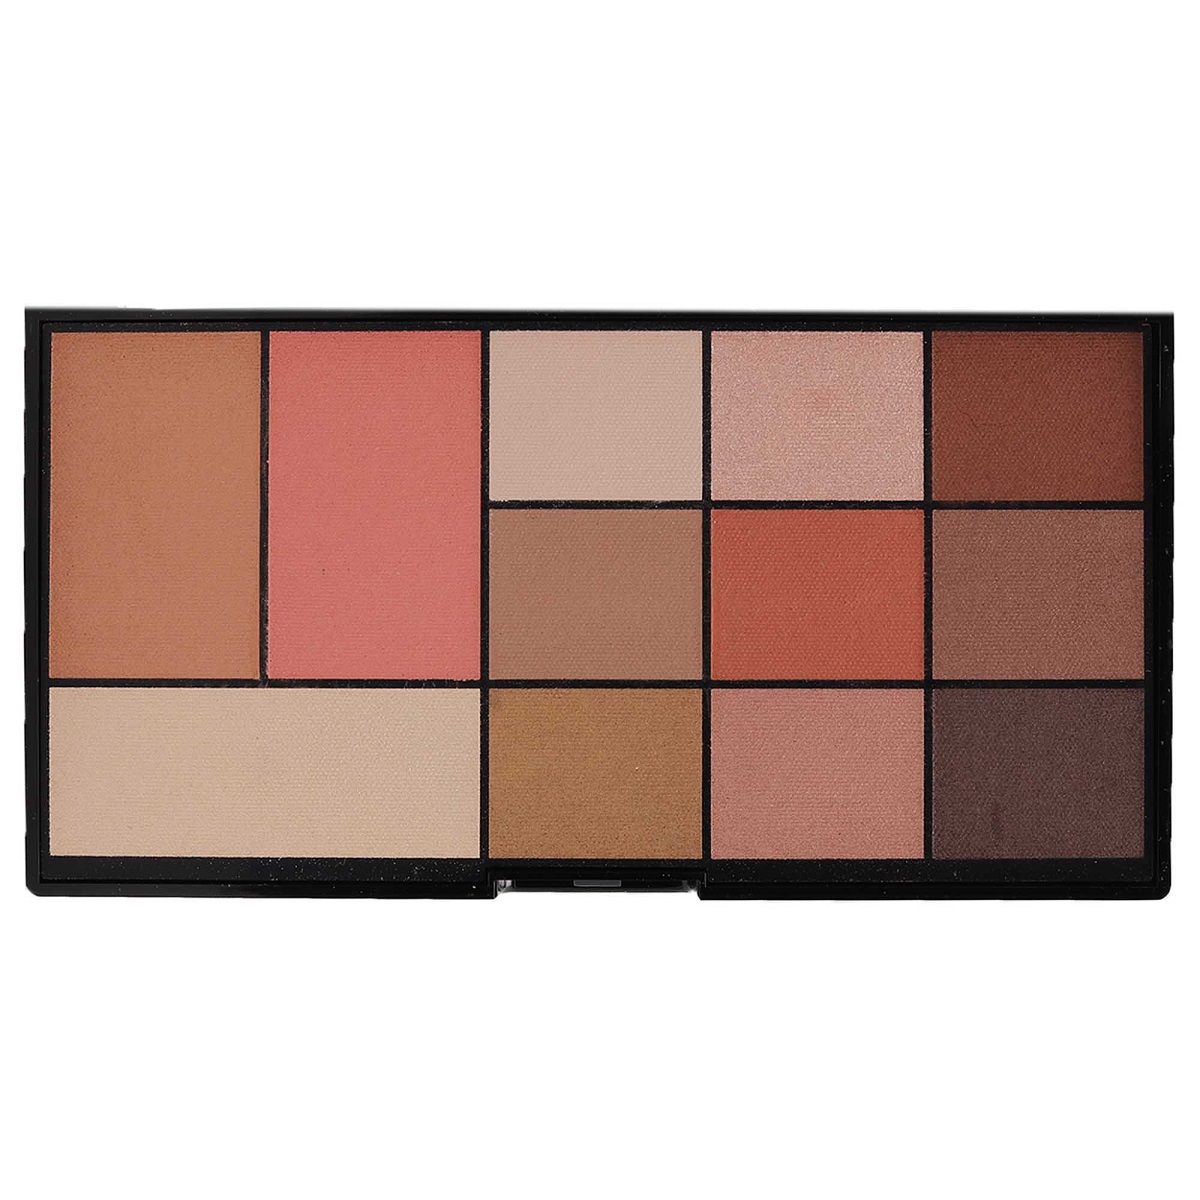 Golden Rose City Style Eyeshadow Palette No.01 Warm Nude